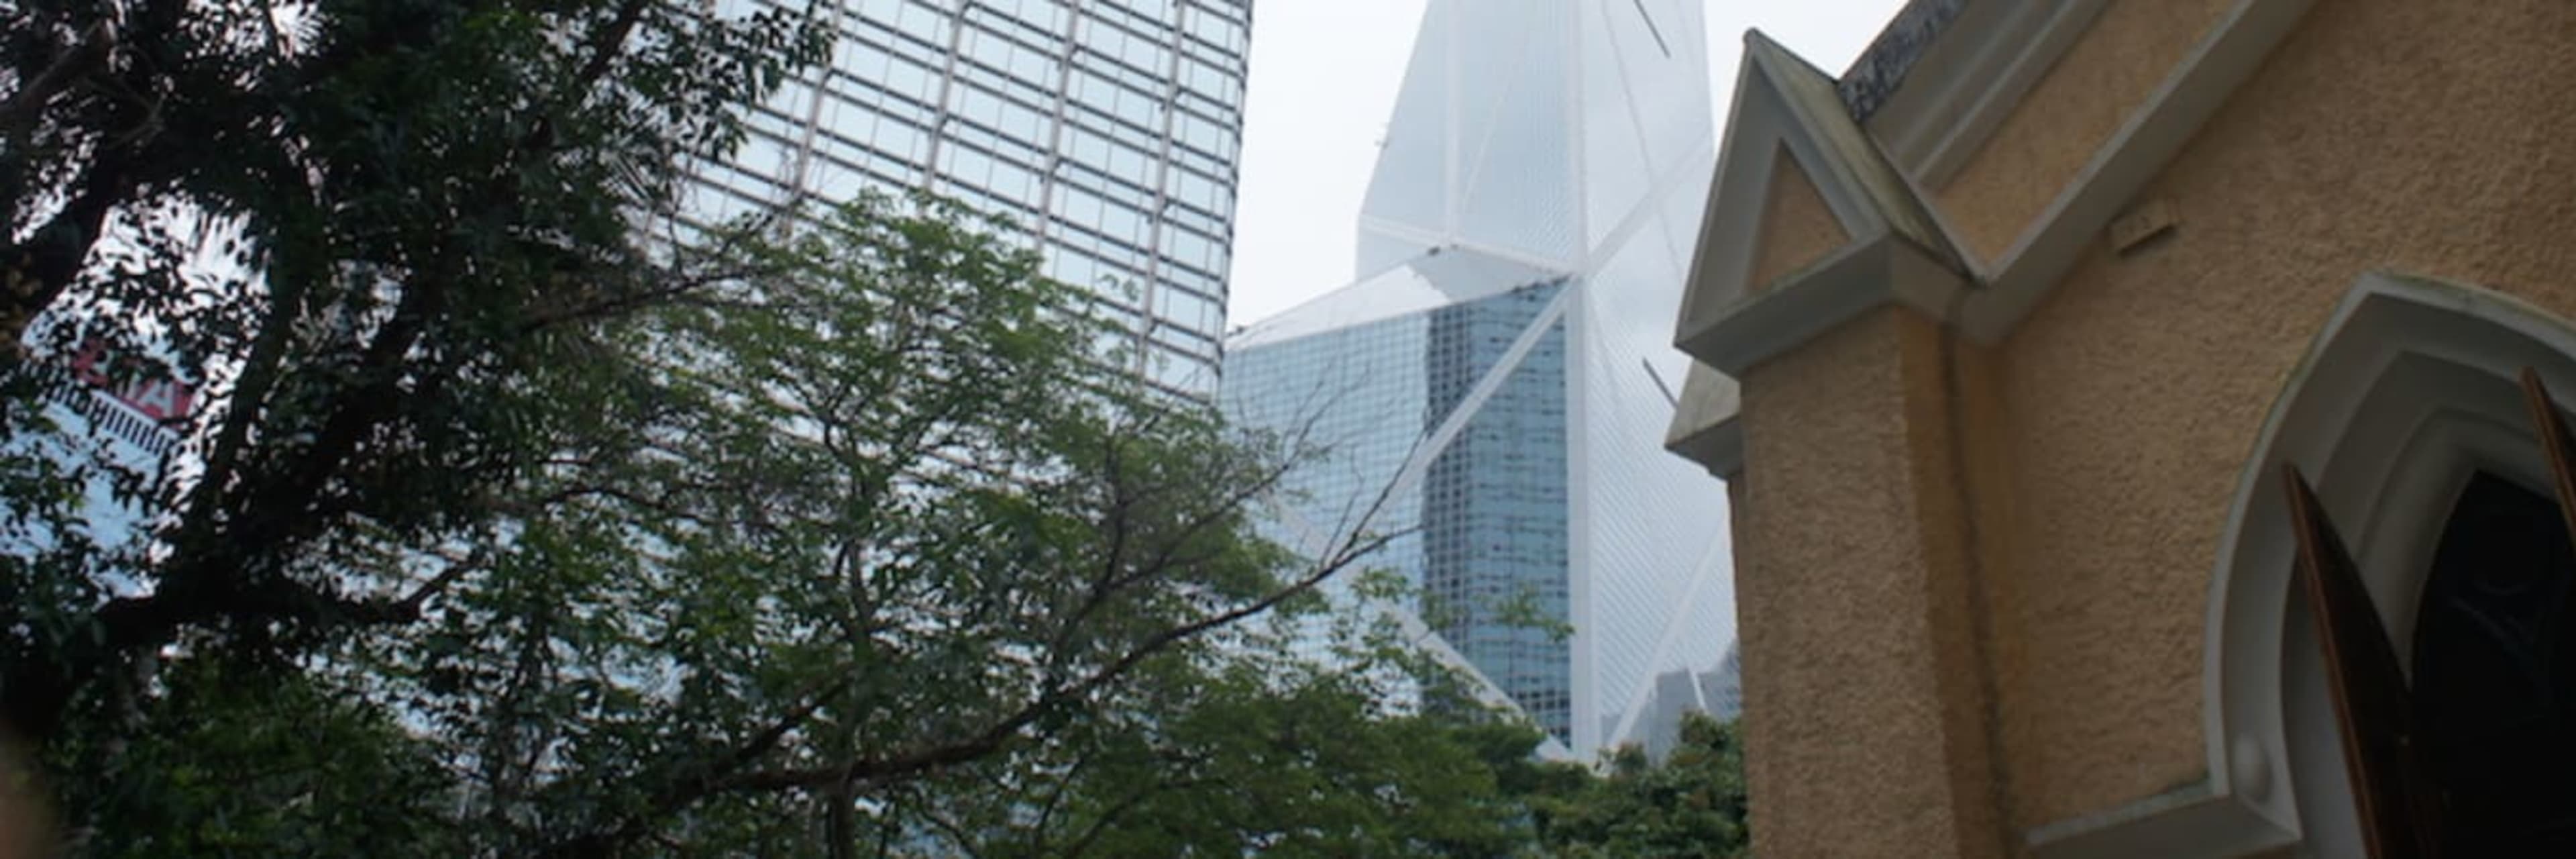 Buildings on the Hong Kong heritage and history tour.